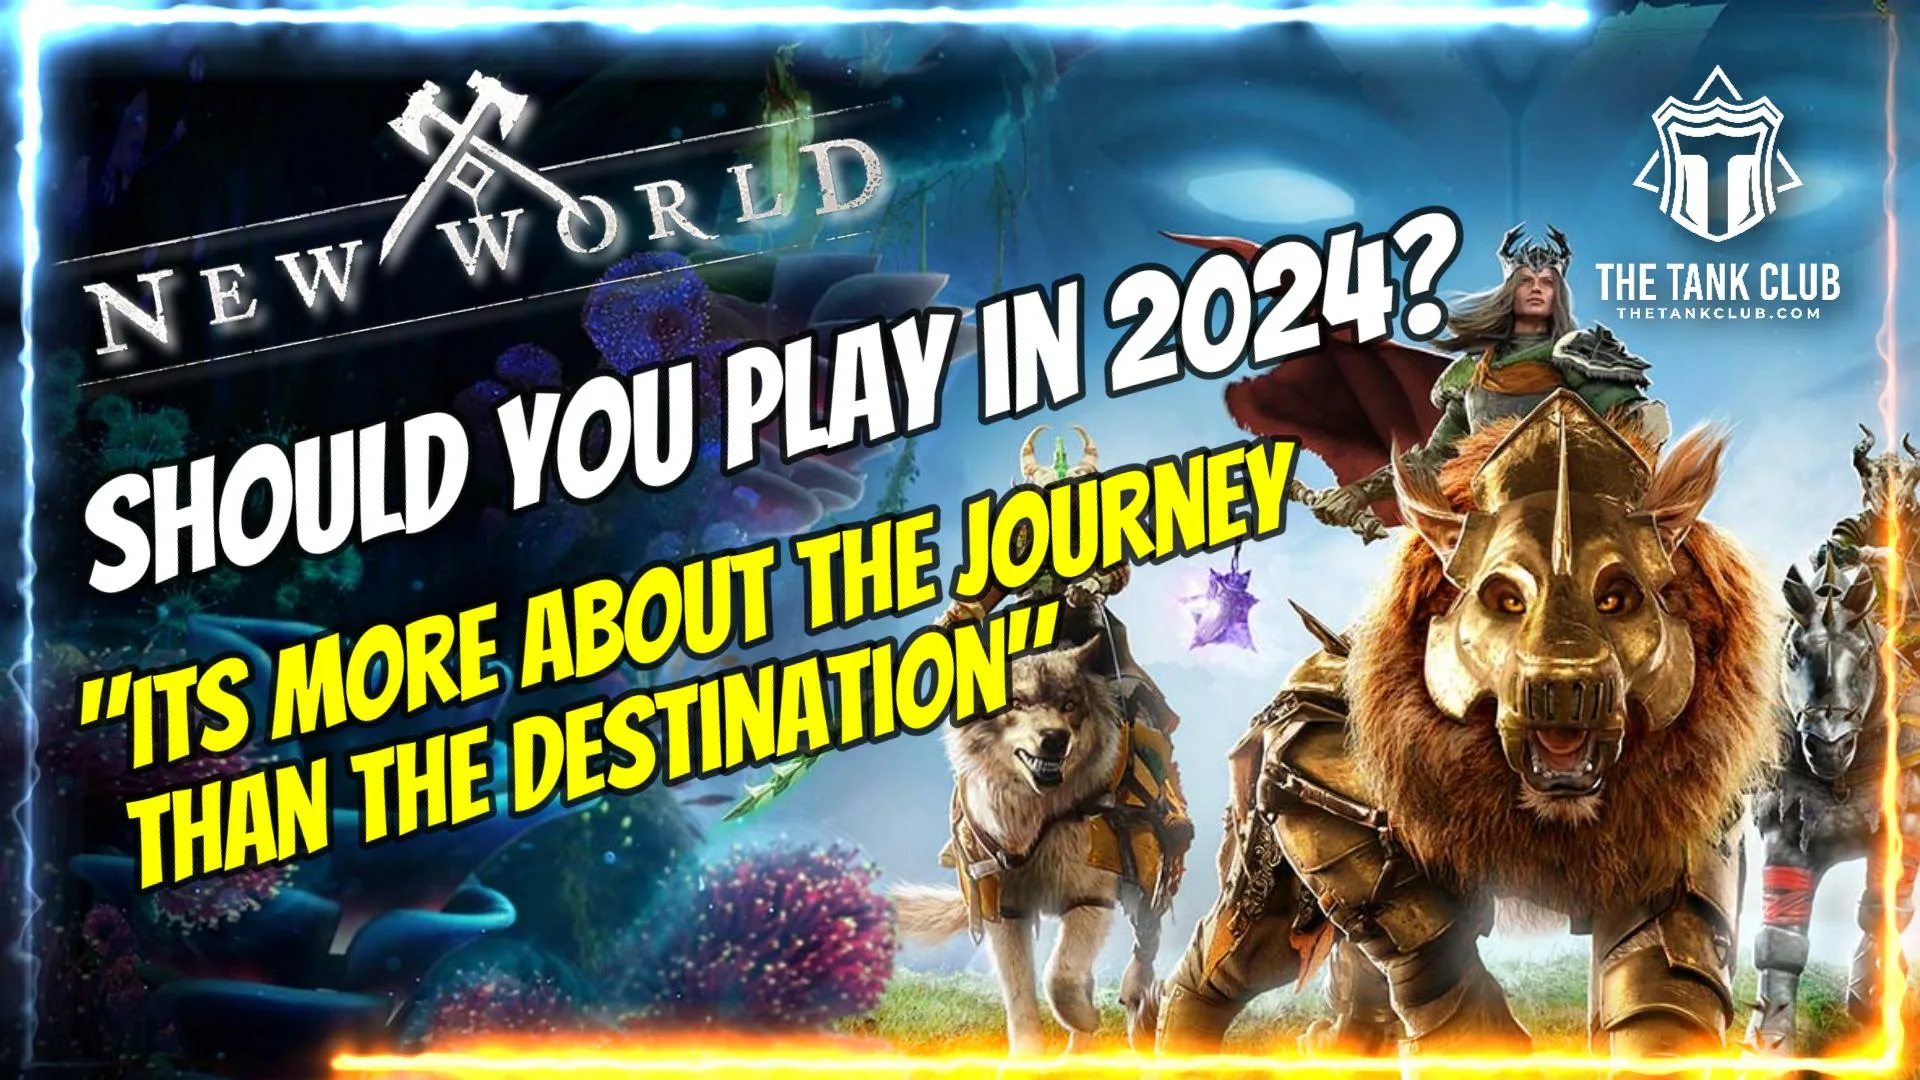 Should You Play New World In 2024? The Tank Club